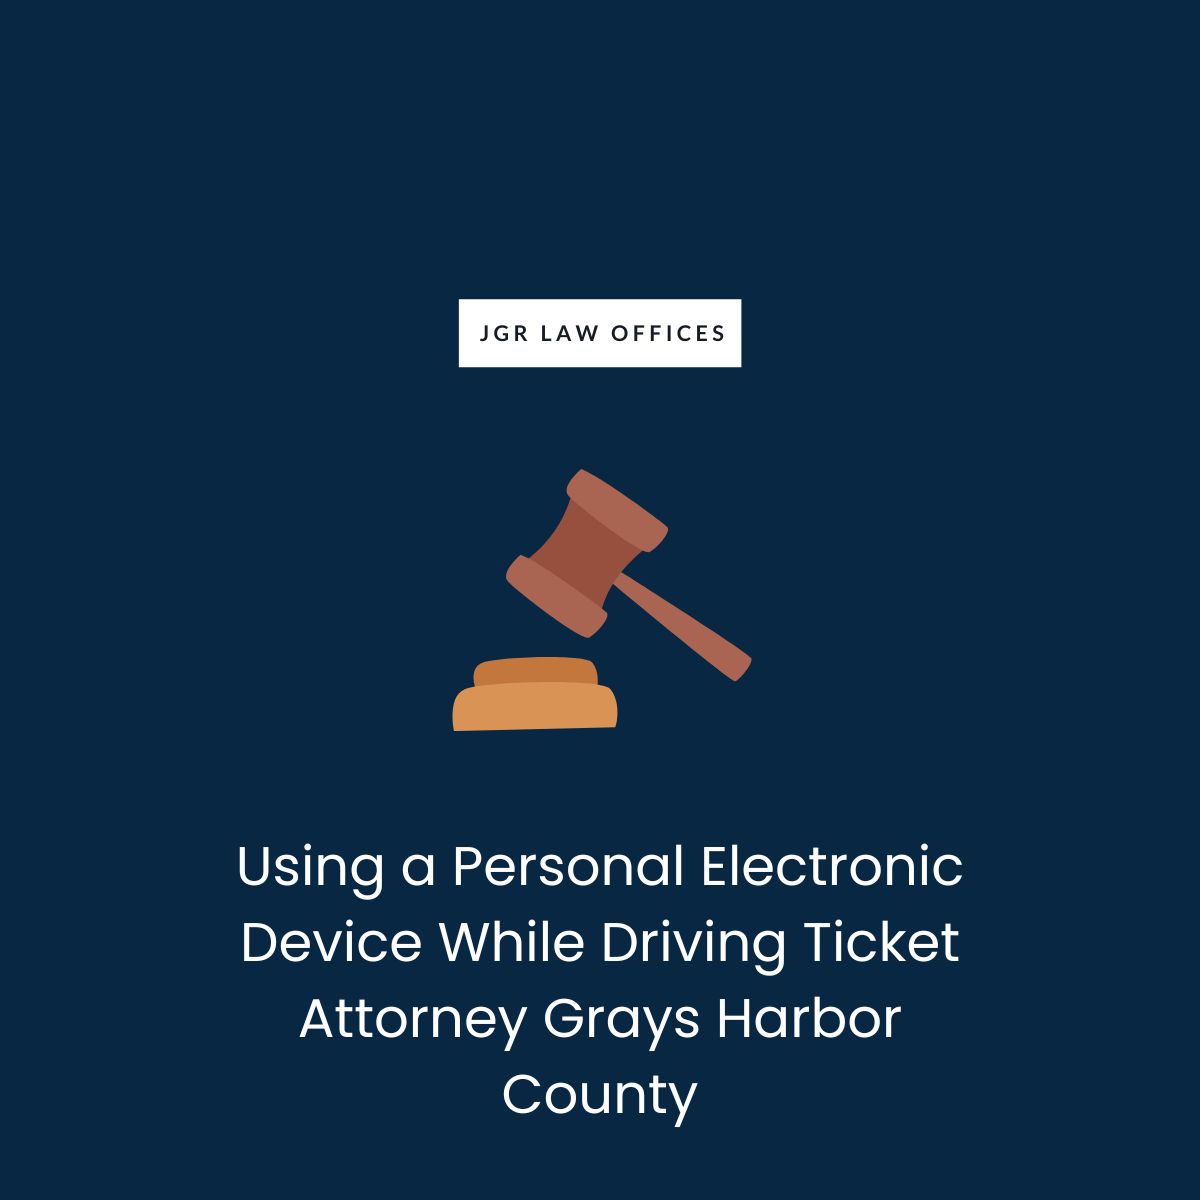 Using a Personal Electronic Device While Driving Ticket Attorney Grays Harbor County